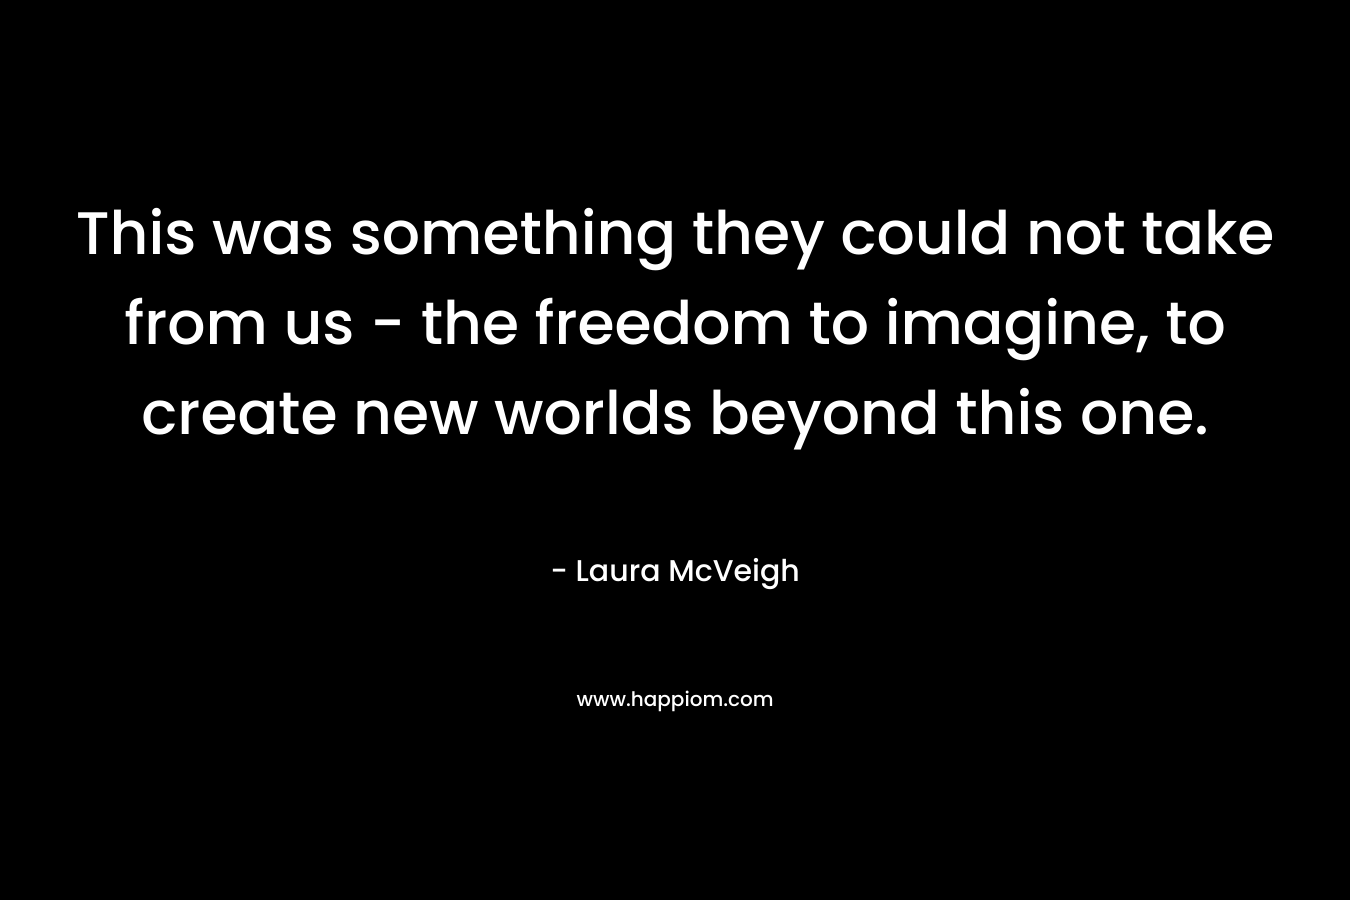 This was something they could not take from us - the freedom to imagine, to create new worlds beyond this one.